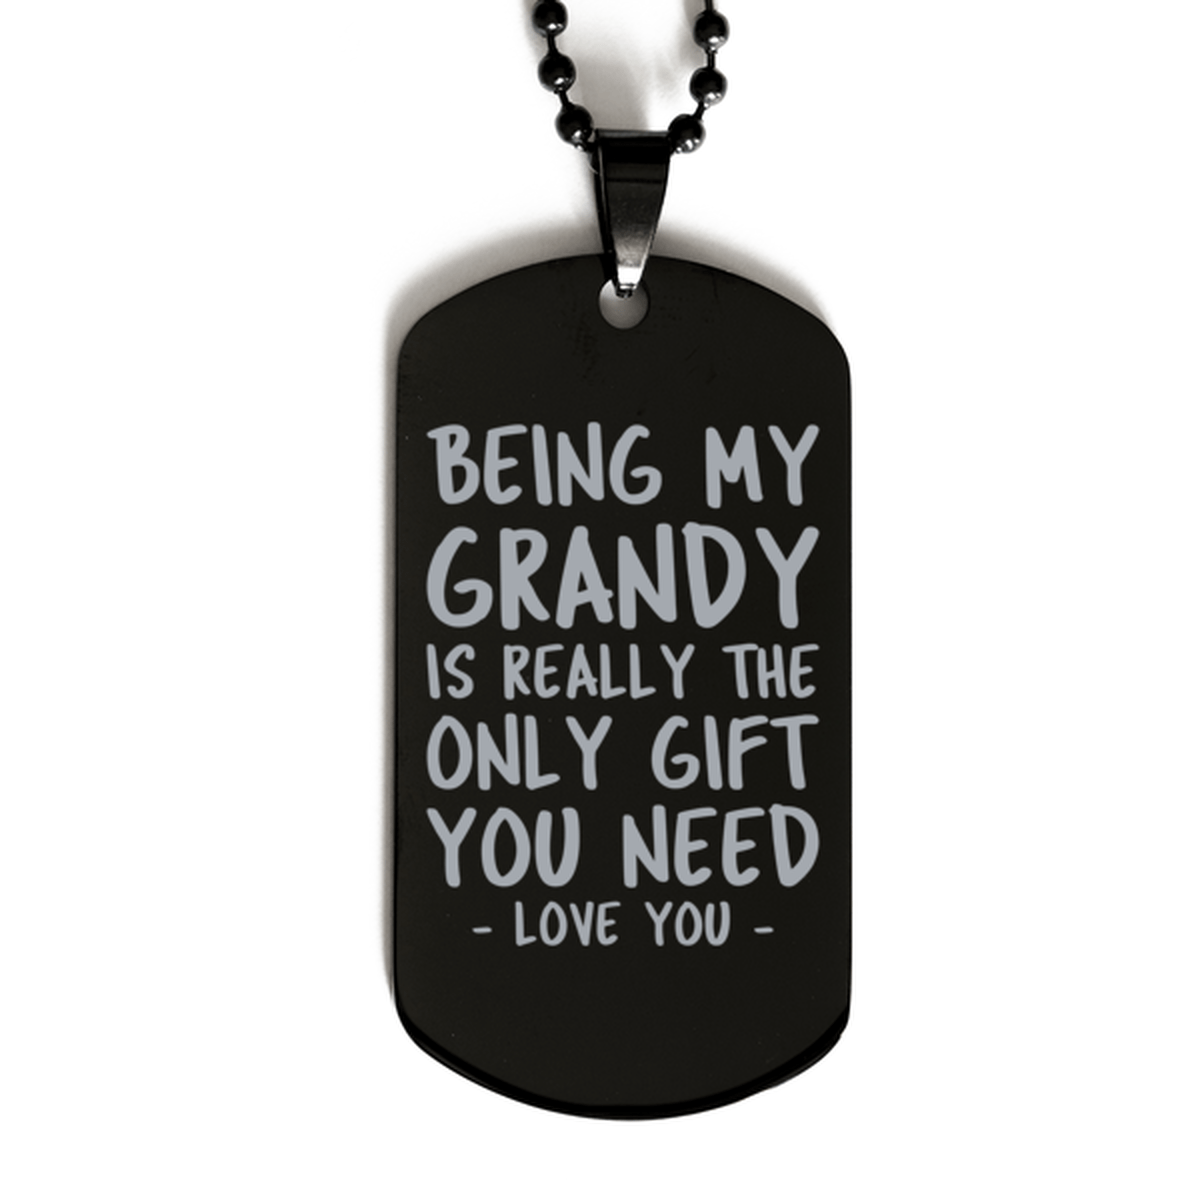 Funny Grandy Black Dog Tag Necklace, Being My Grandy Is Really the Only Gift You Need, Best Birthday Gifts for Grandy